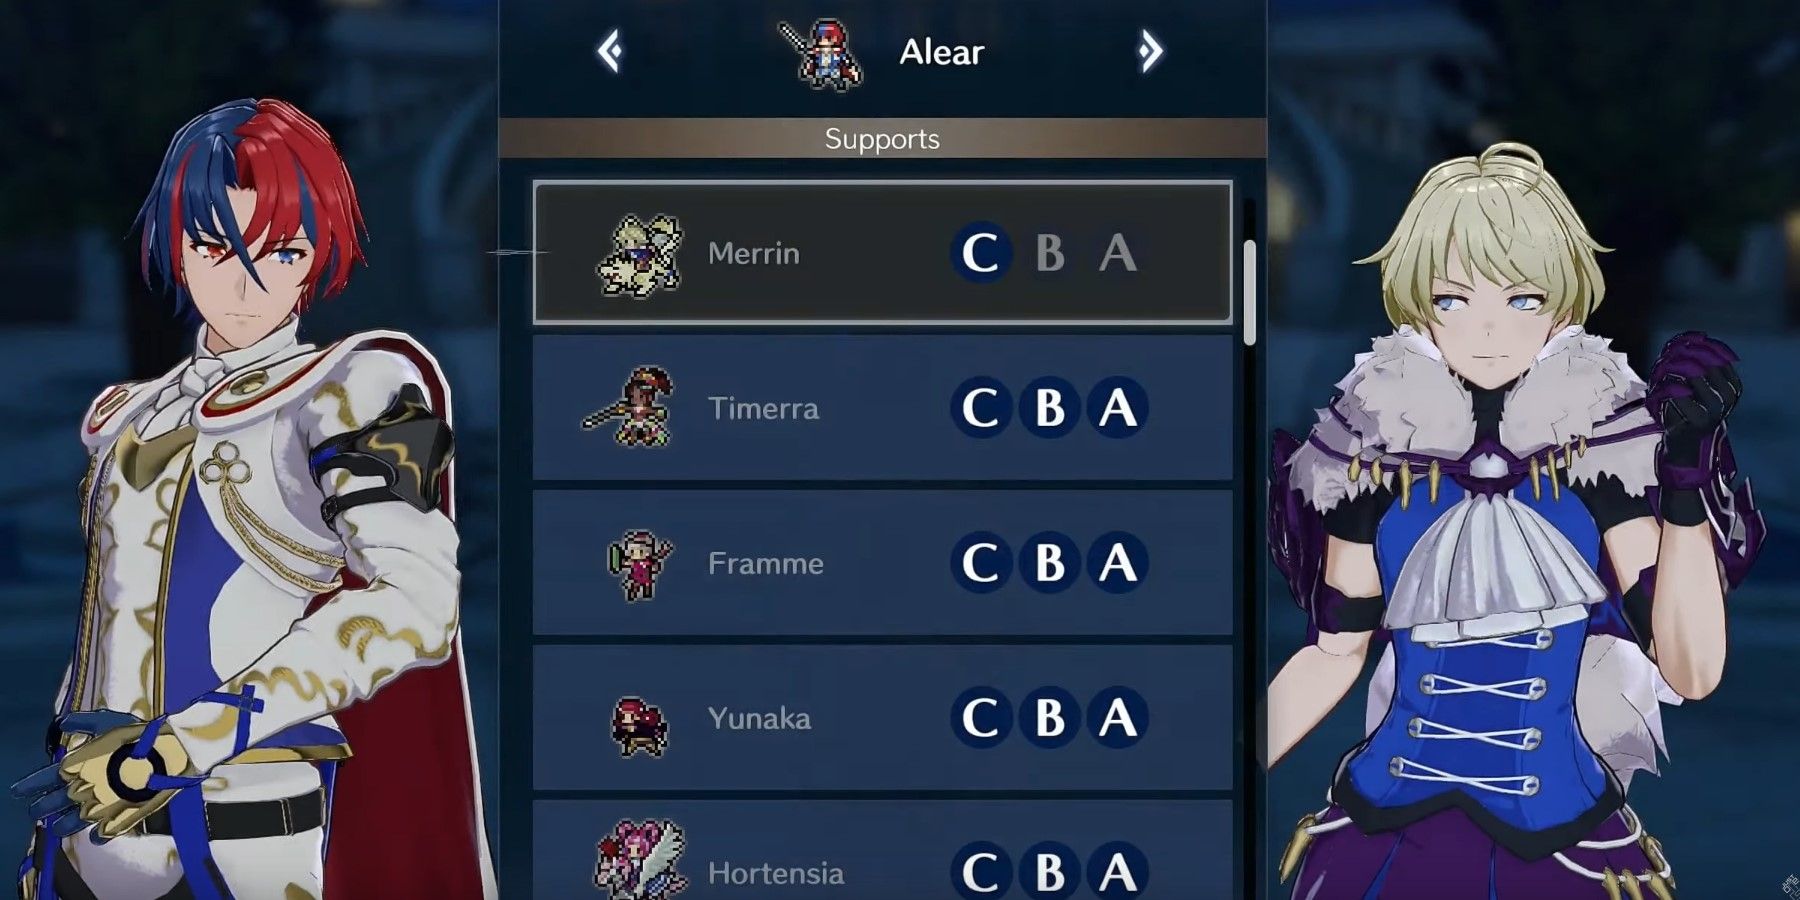 How To Get Support S-Rank In Fire Emblem Engage